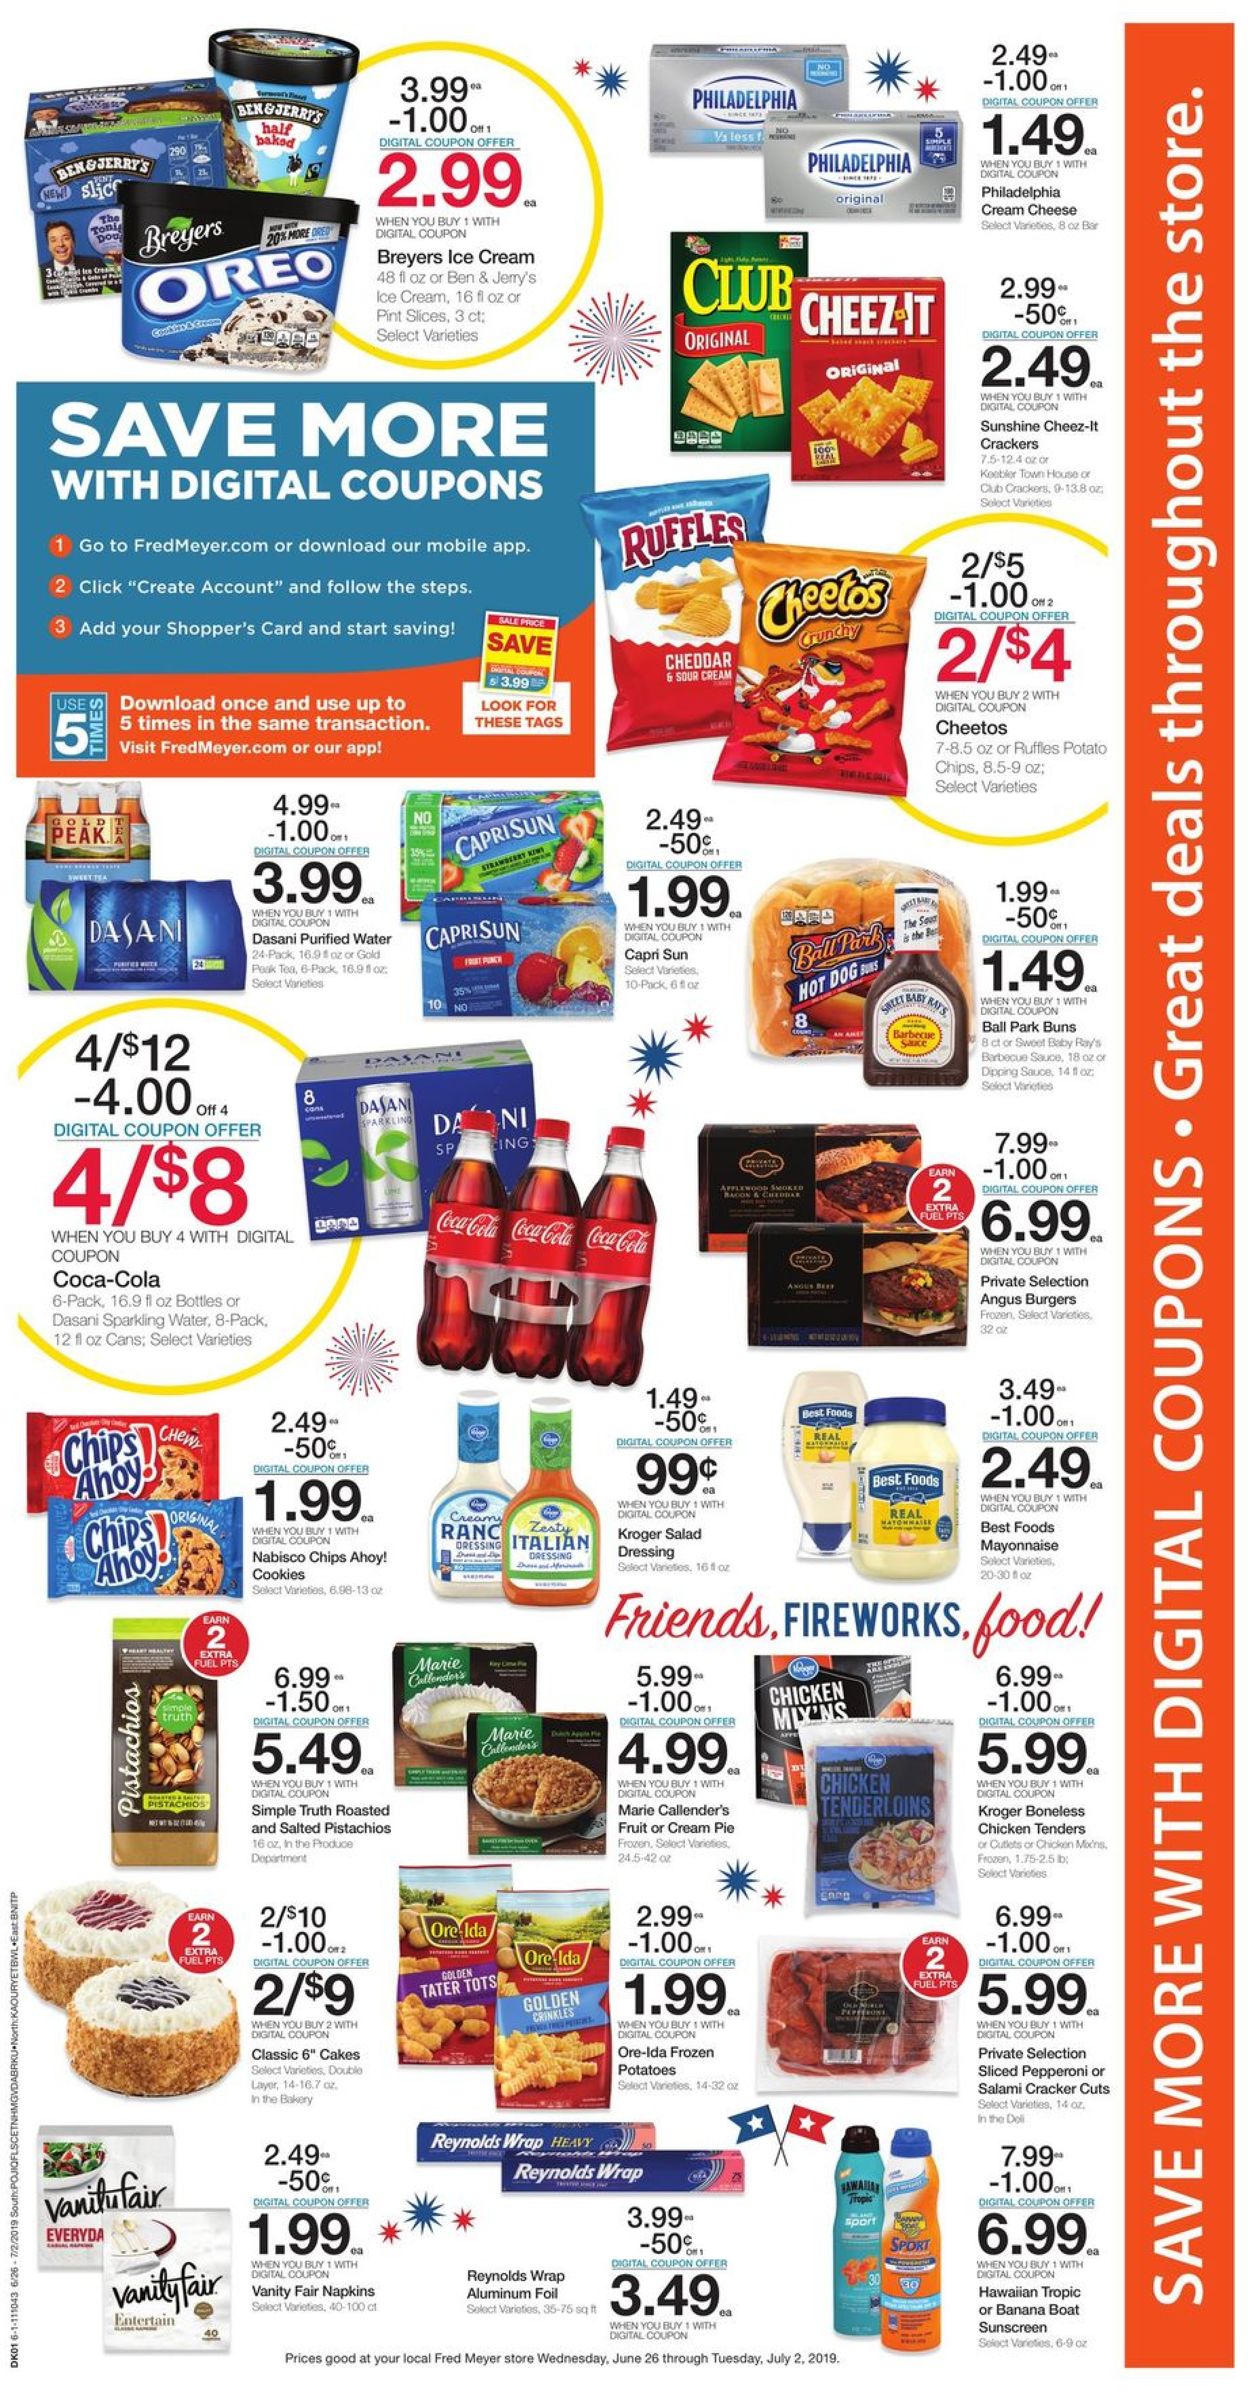 Fred Meyer Current weekly ad 06/26 - 07/02/2019 [7] - frequent-ads.com